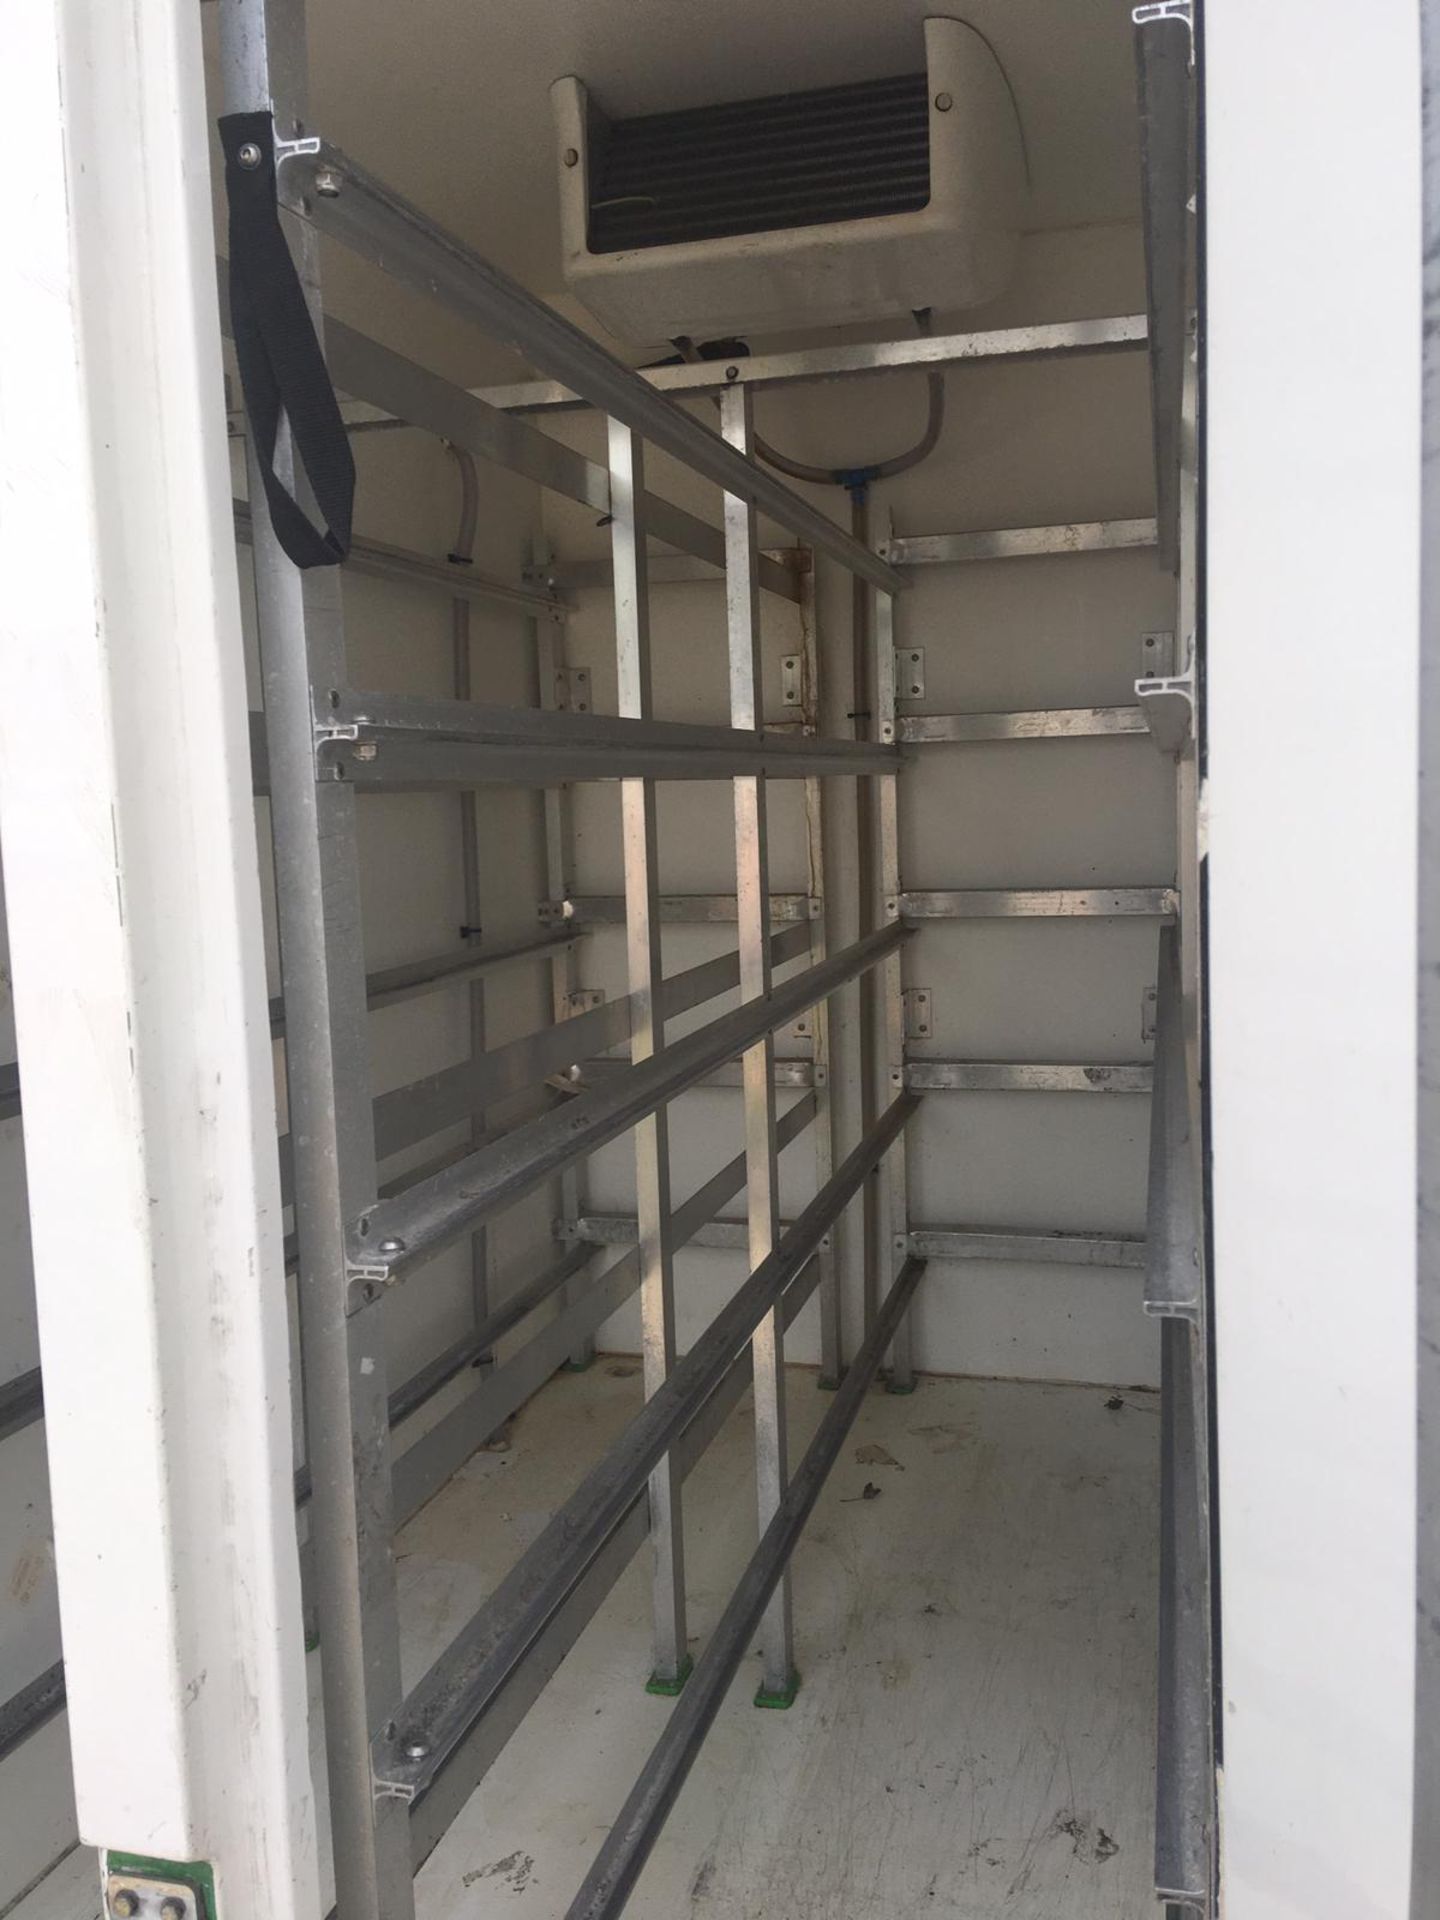 EX SUPERMARKET GAH REFRIGERATION REAR BOX UNIT, ROLLER SHUTTER DOOR, YOU'RE BIDDING FOR THE BOX ONLY - Image 5 of 10